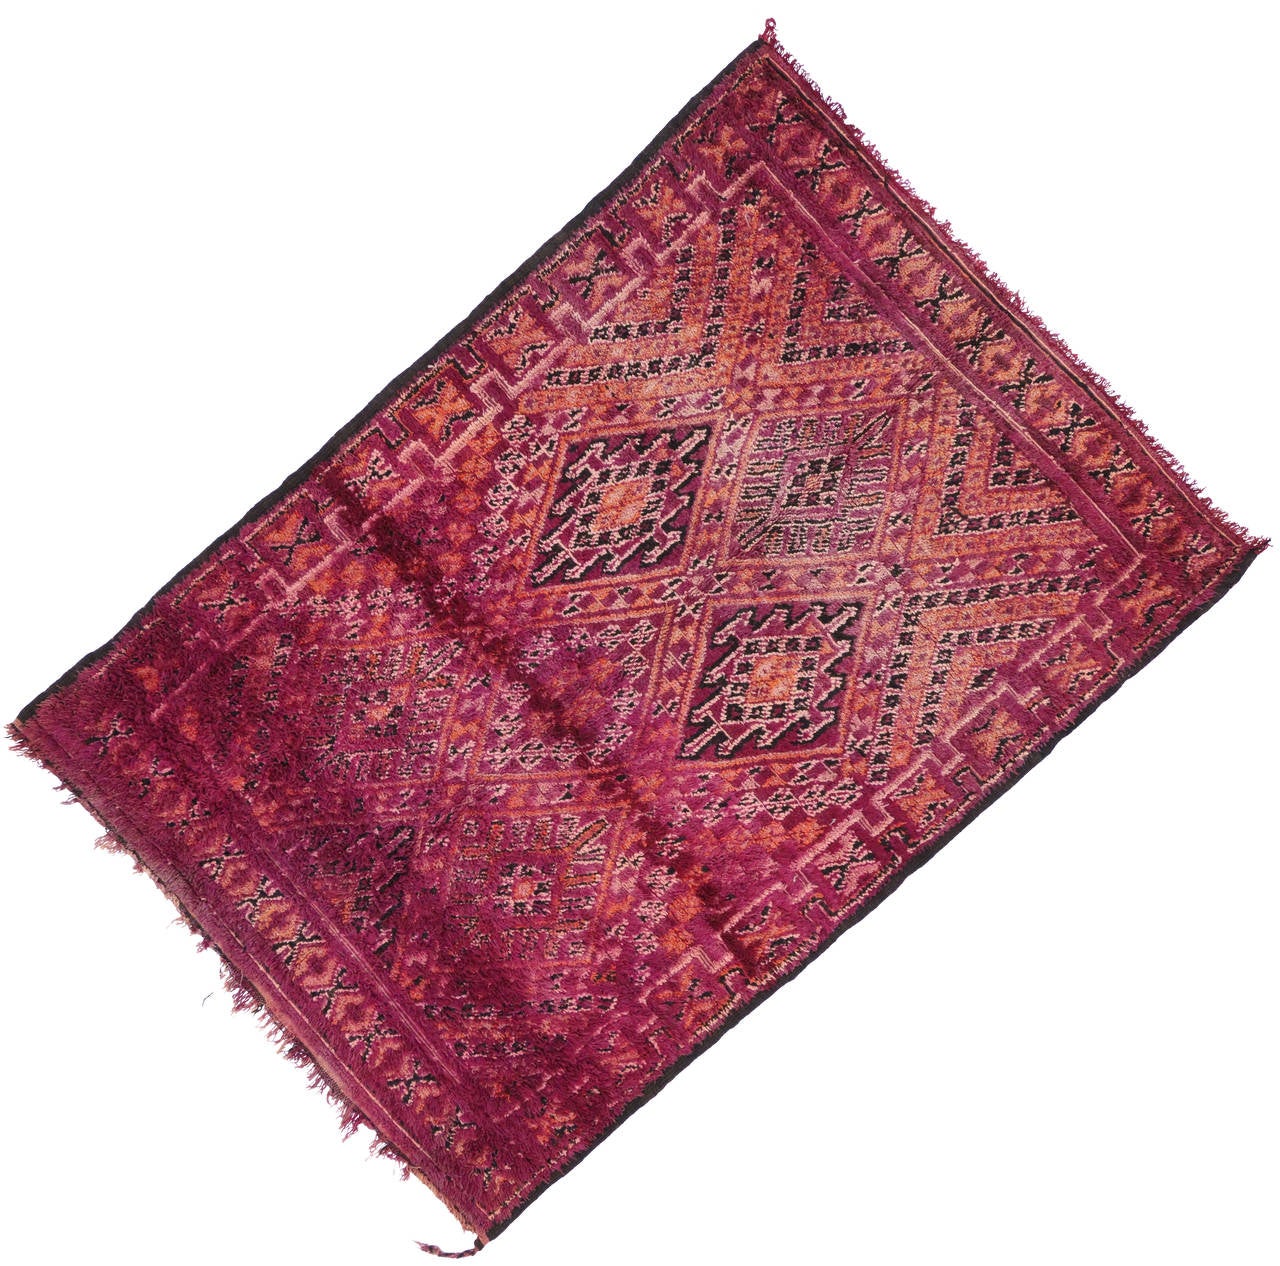 The Berber carpets from Morocco are part of North Africa's renowned indigenous tribe weaving. An extremely lively and colorful vintage Moroccan carpet that can transform a plain room into a lively space. The Moroccan carpet weavers, mostly women,